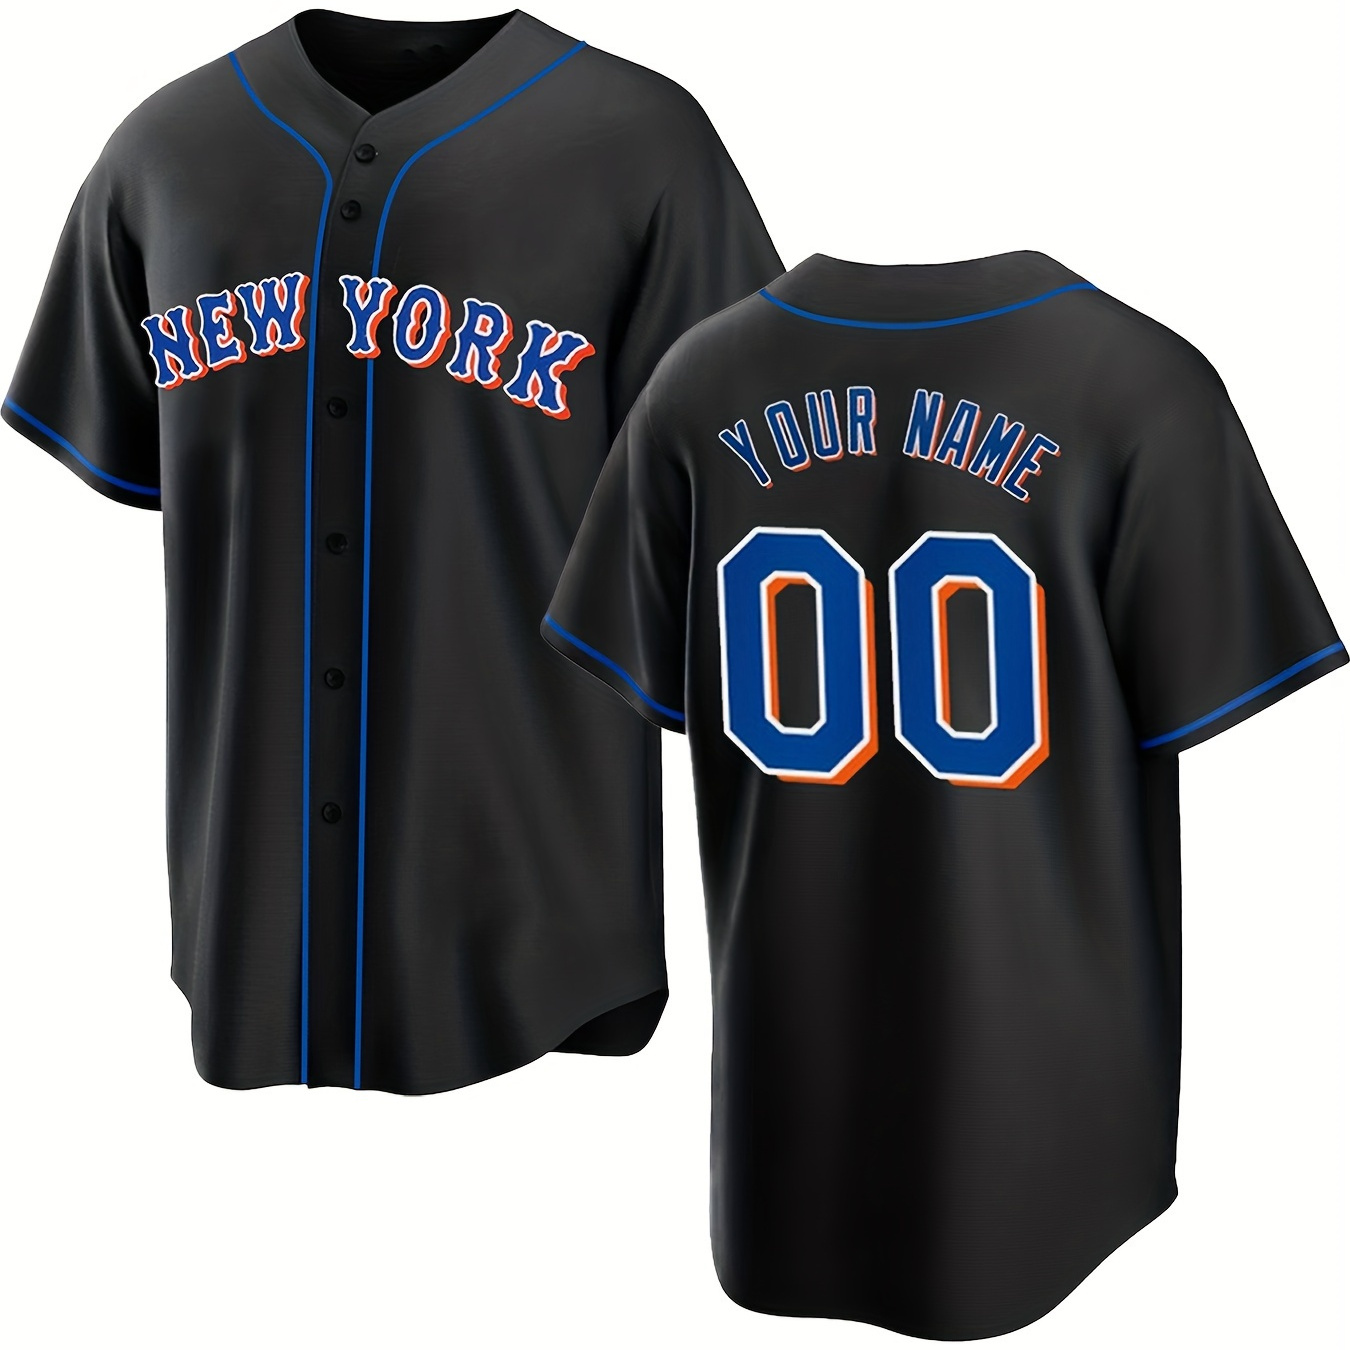 

Custom Men's Baseball Jersey, Personalized Embroidered Team Name And Your Number, Sport Style, Comfort Fit Leisurewear